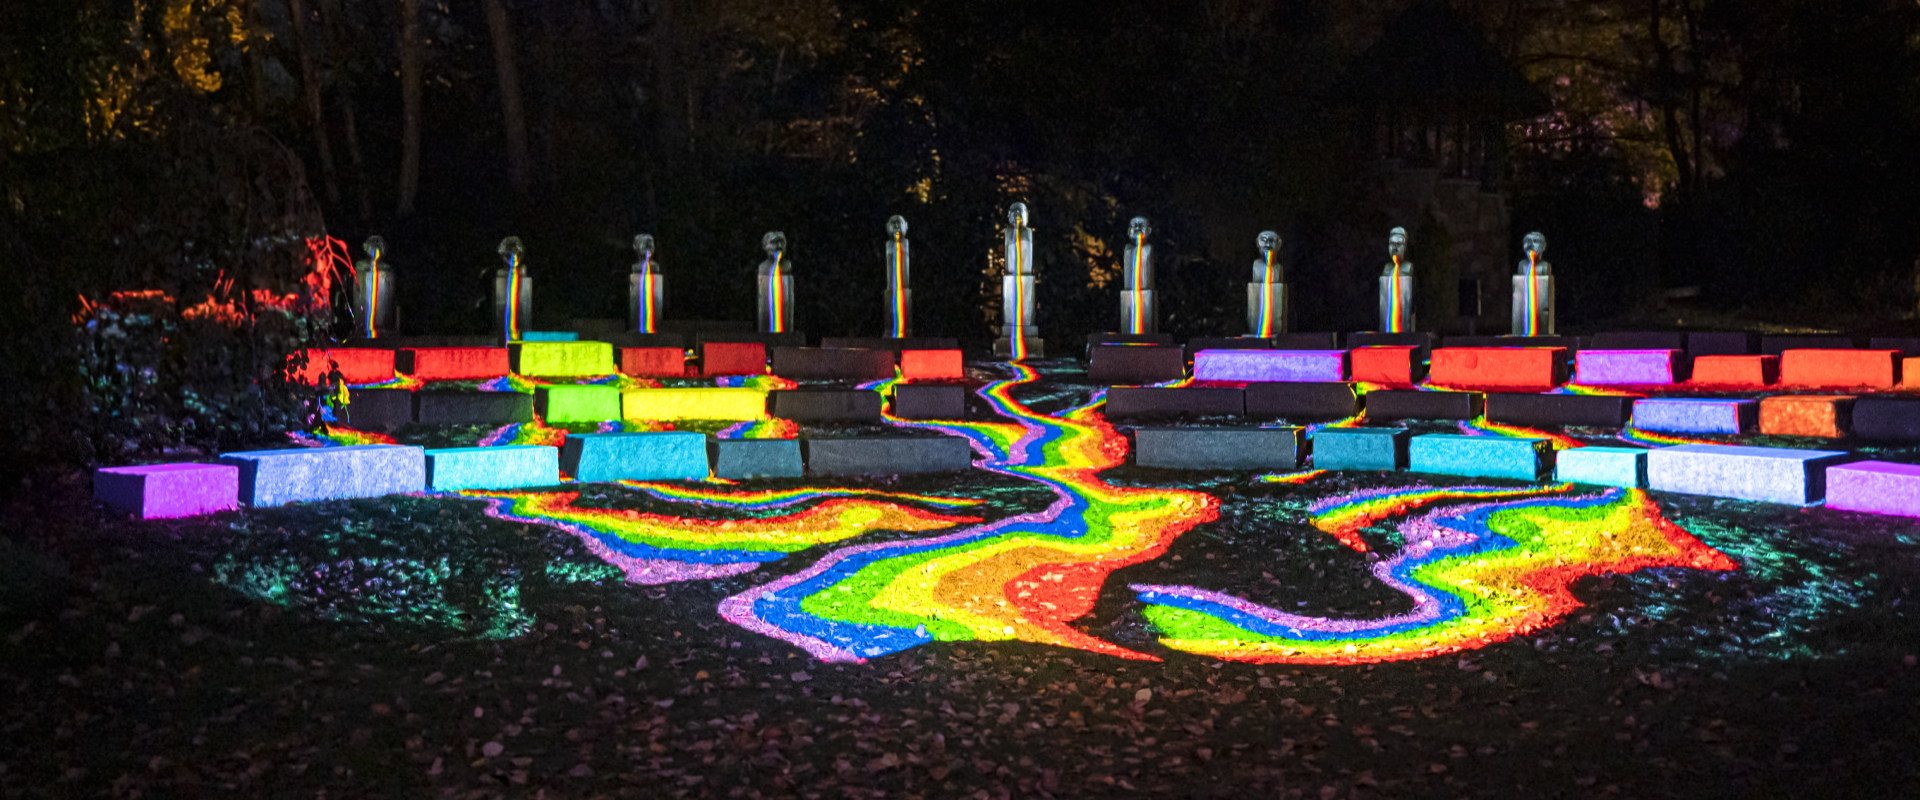 Night Forms Timed Admission Tickets Grounds For Sculpture